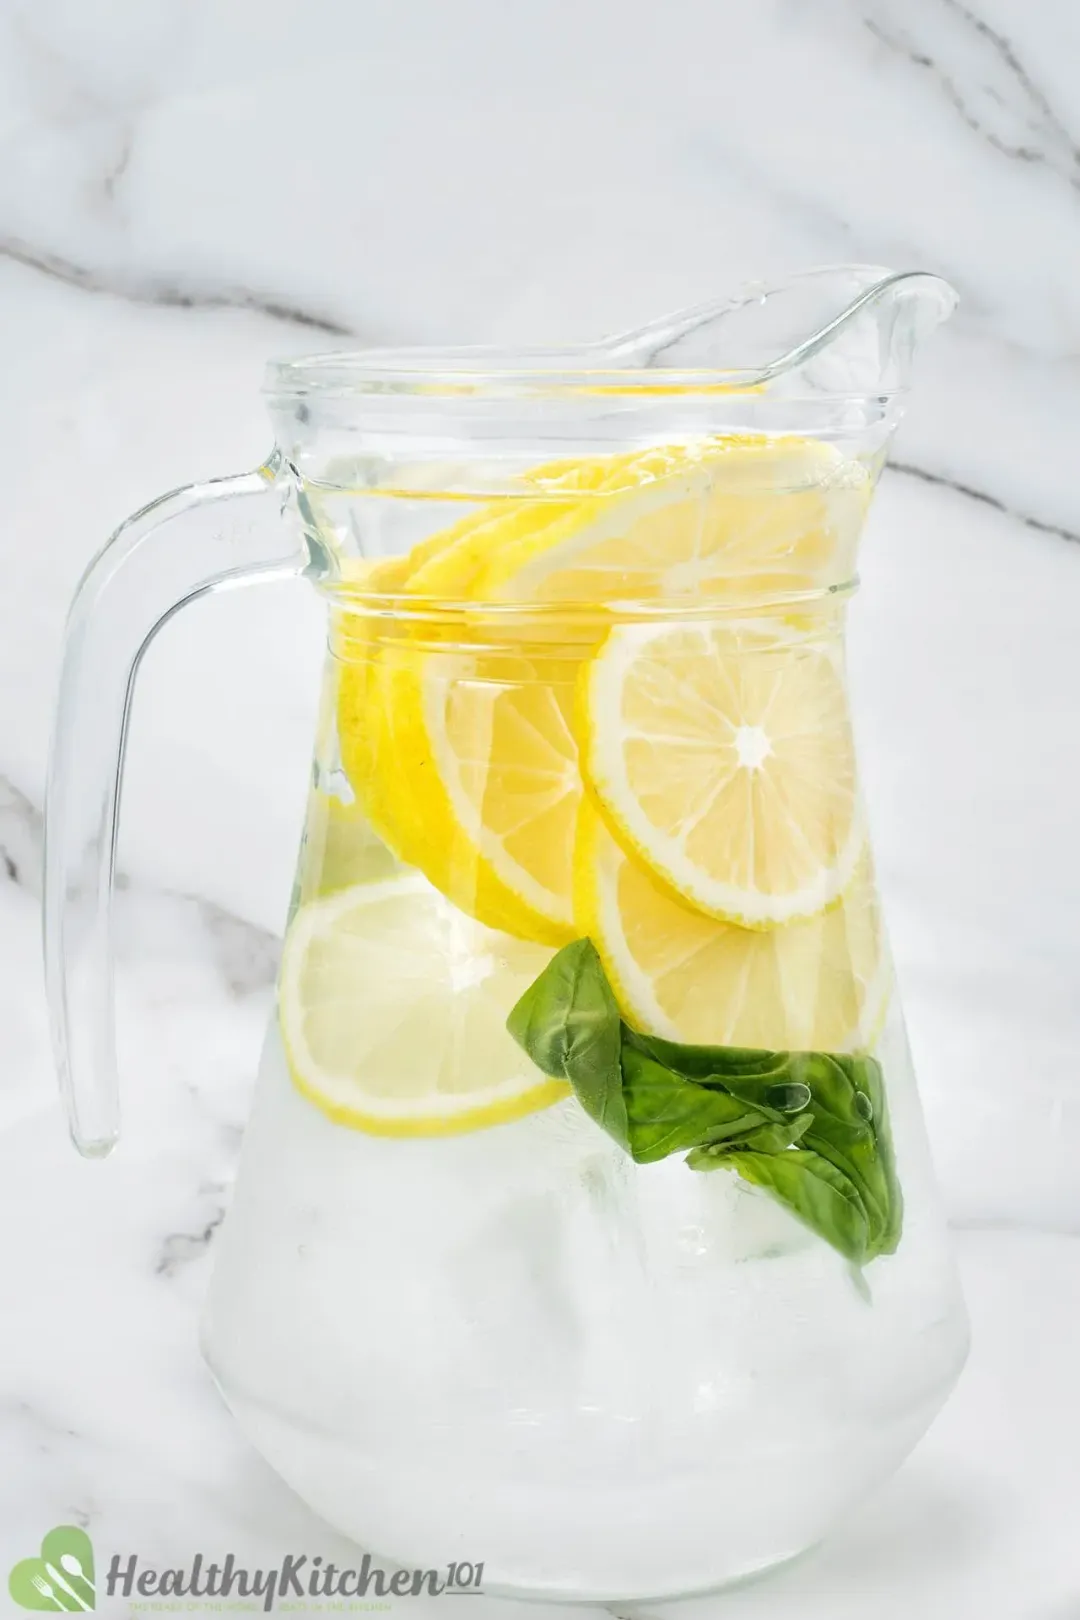 A pitcher of clear water submerging lemon wheels and some basil leaves